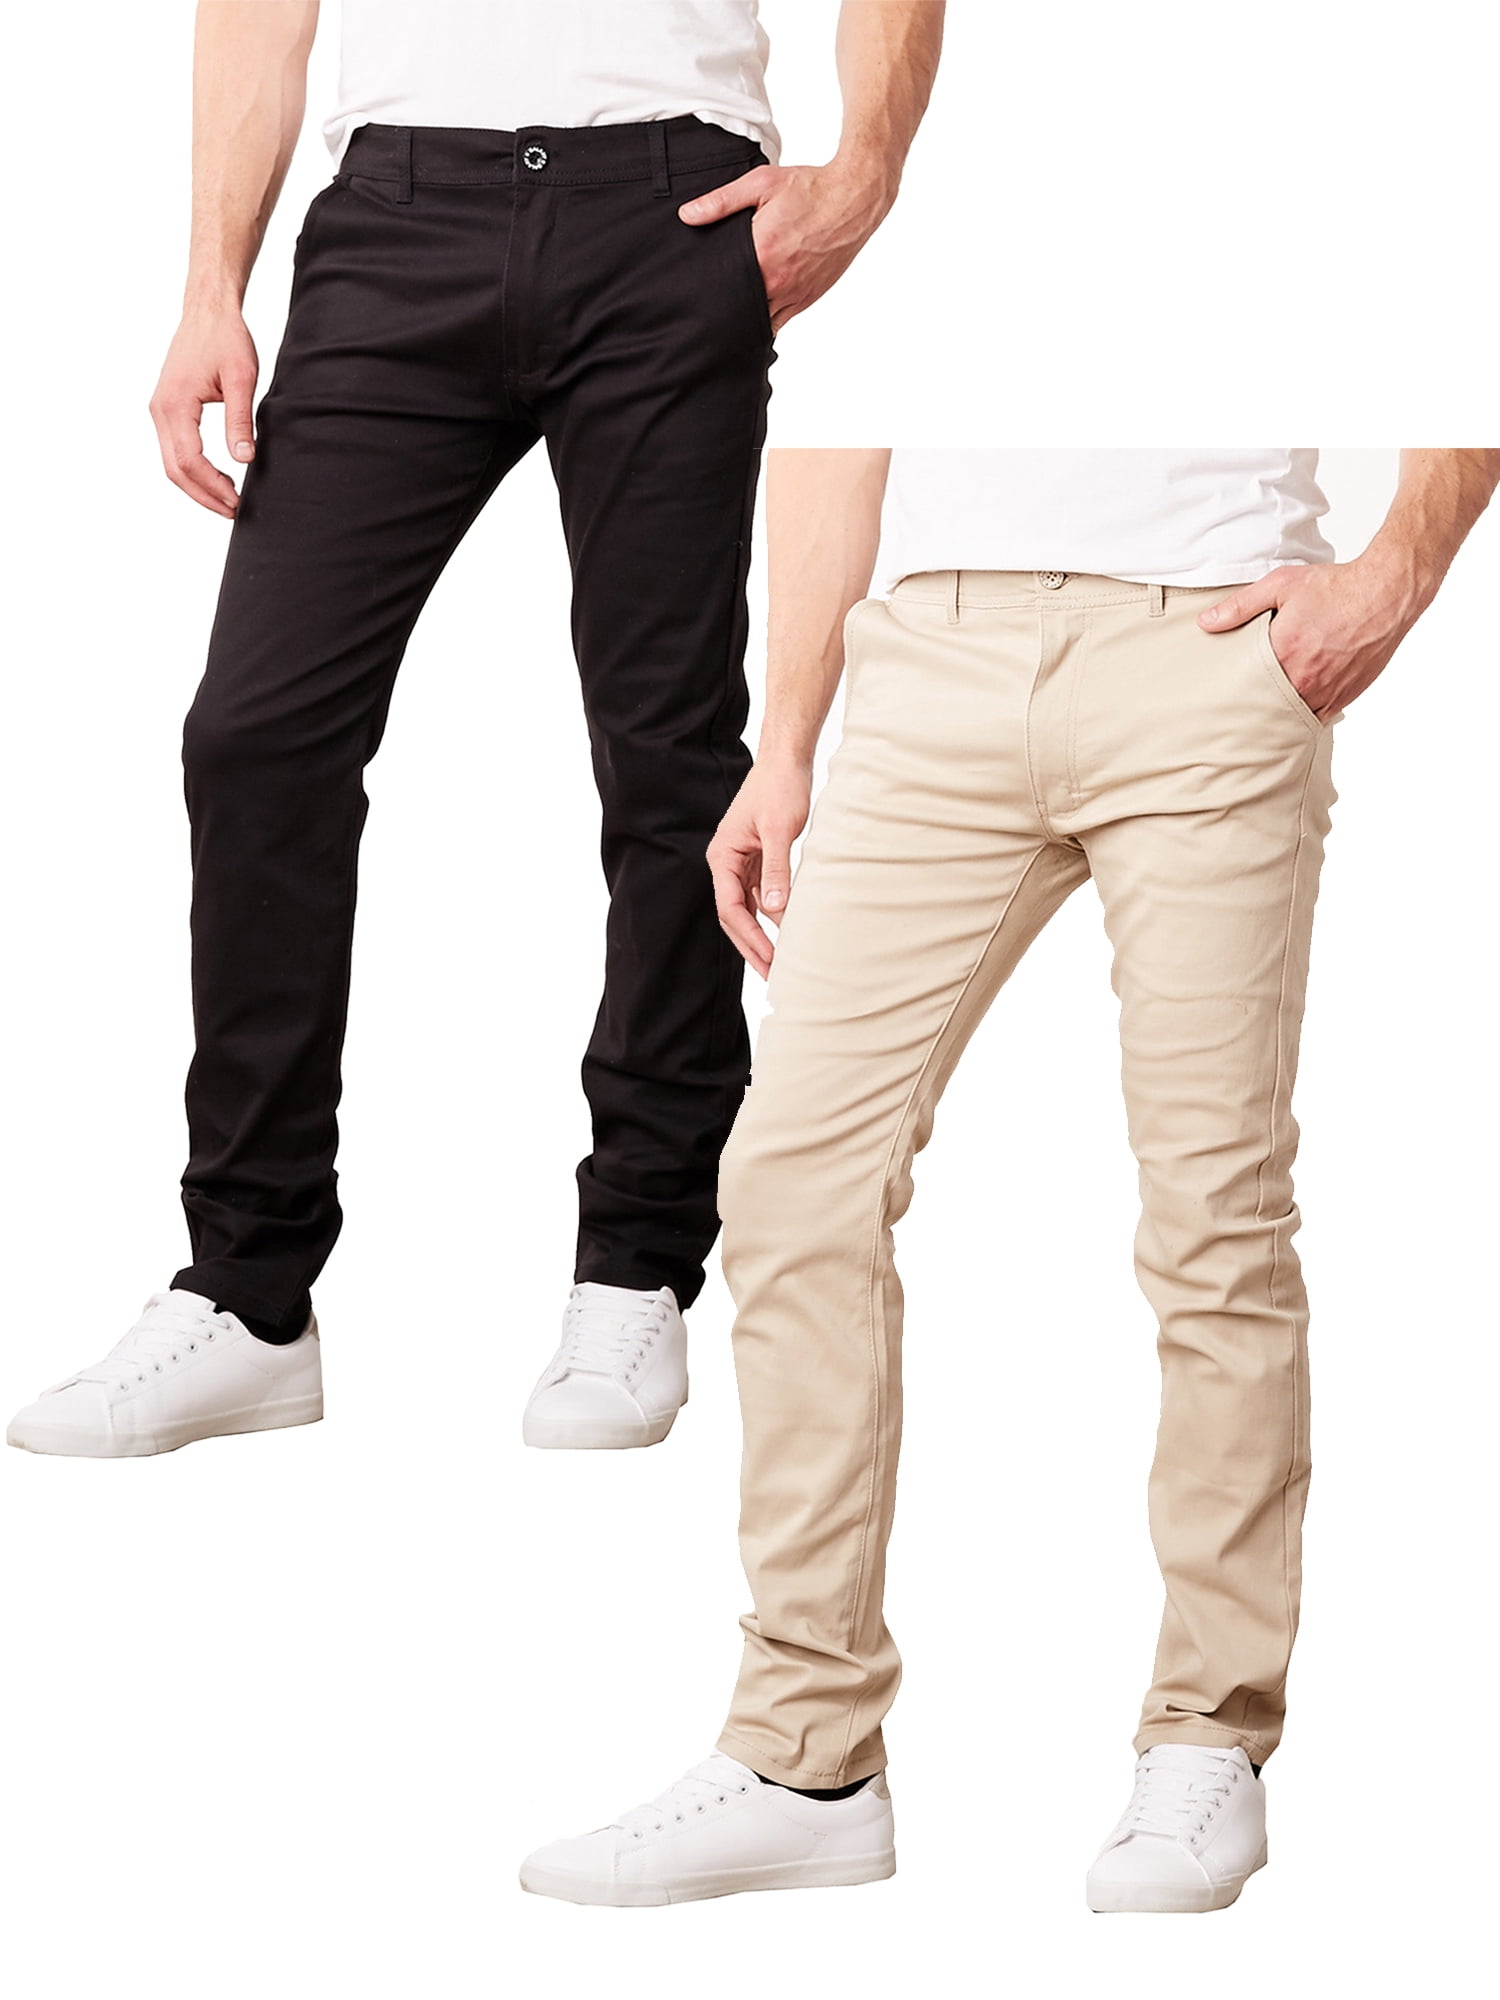 NEW MENS STRETCH SLIM FIT CHINO JEANS STRAIGHT LEG CHINO TROUSERS PANTS 30-42 